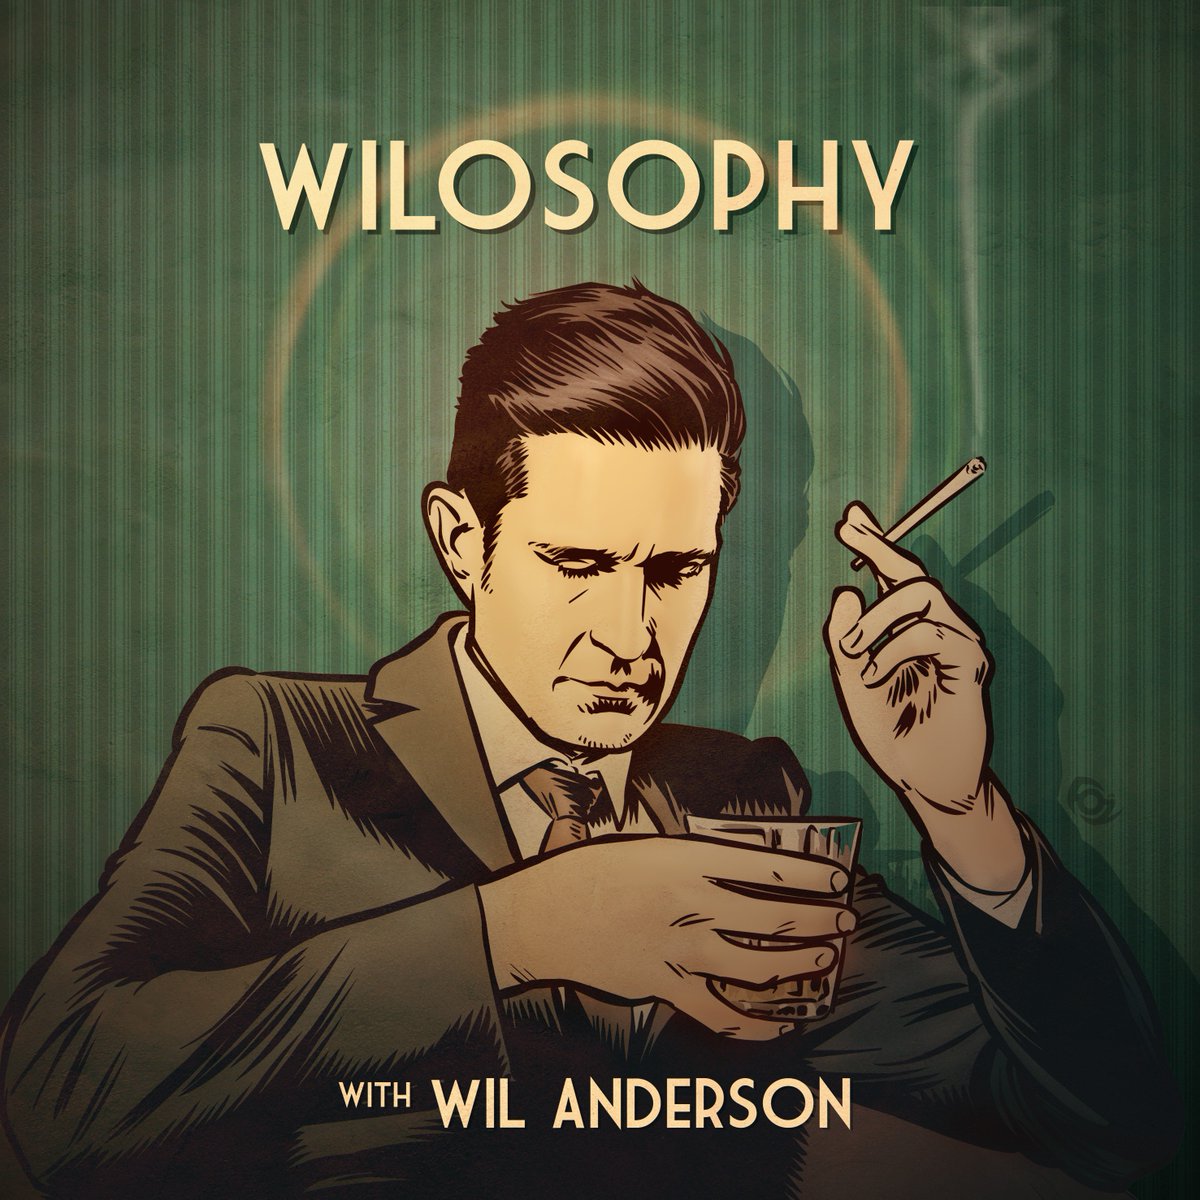 RT @Wil_Anderson: New #WILOSOPHY series starts this Wednesday https://t.co/NqTacYt65R